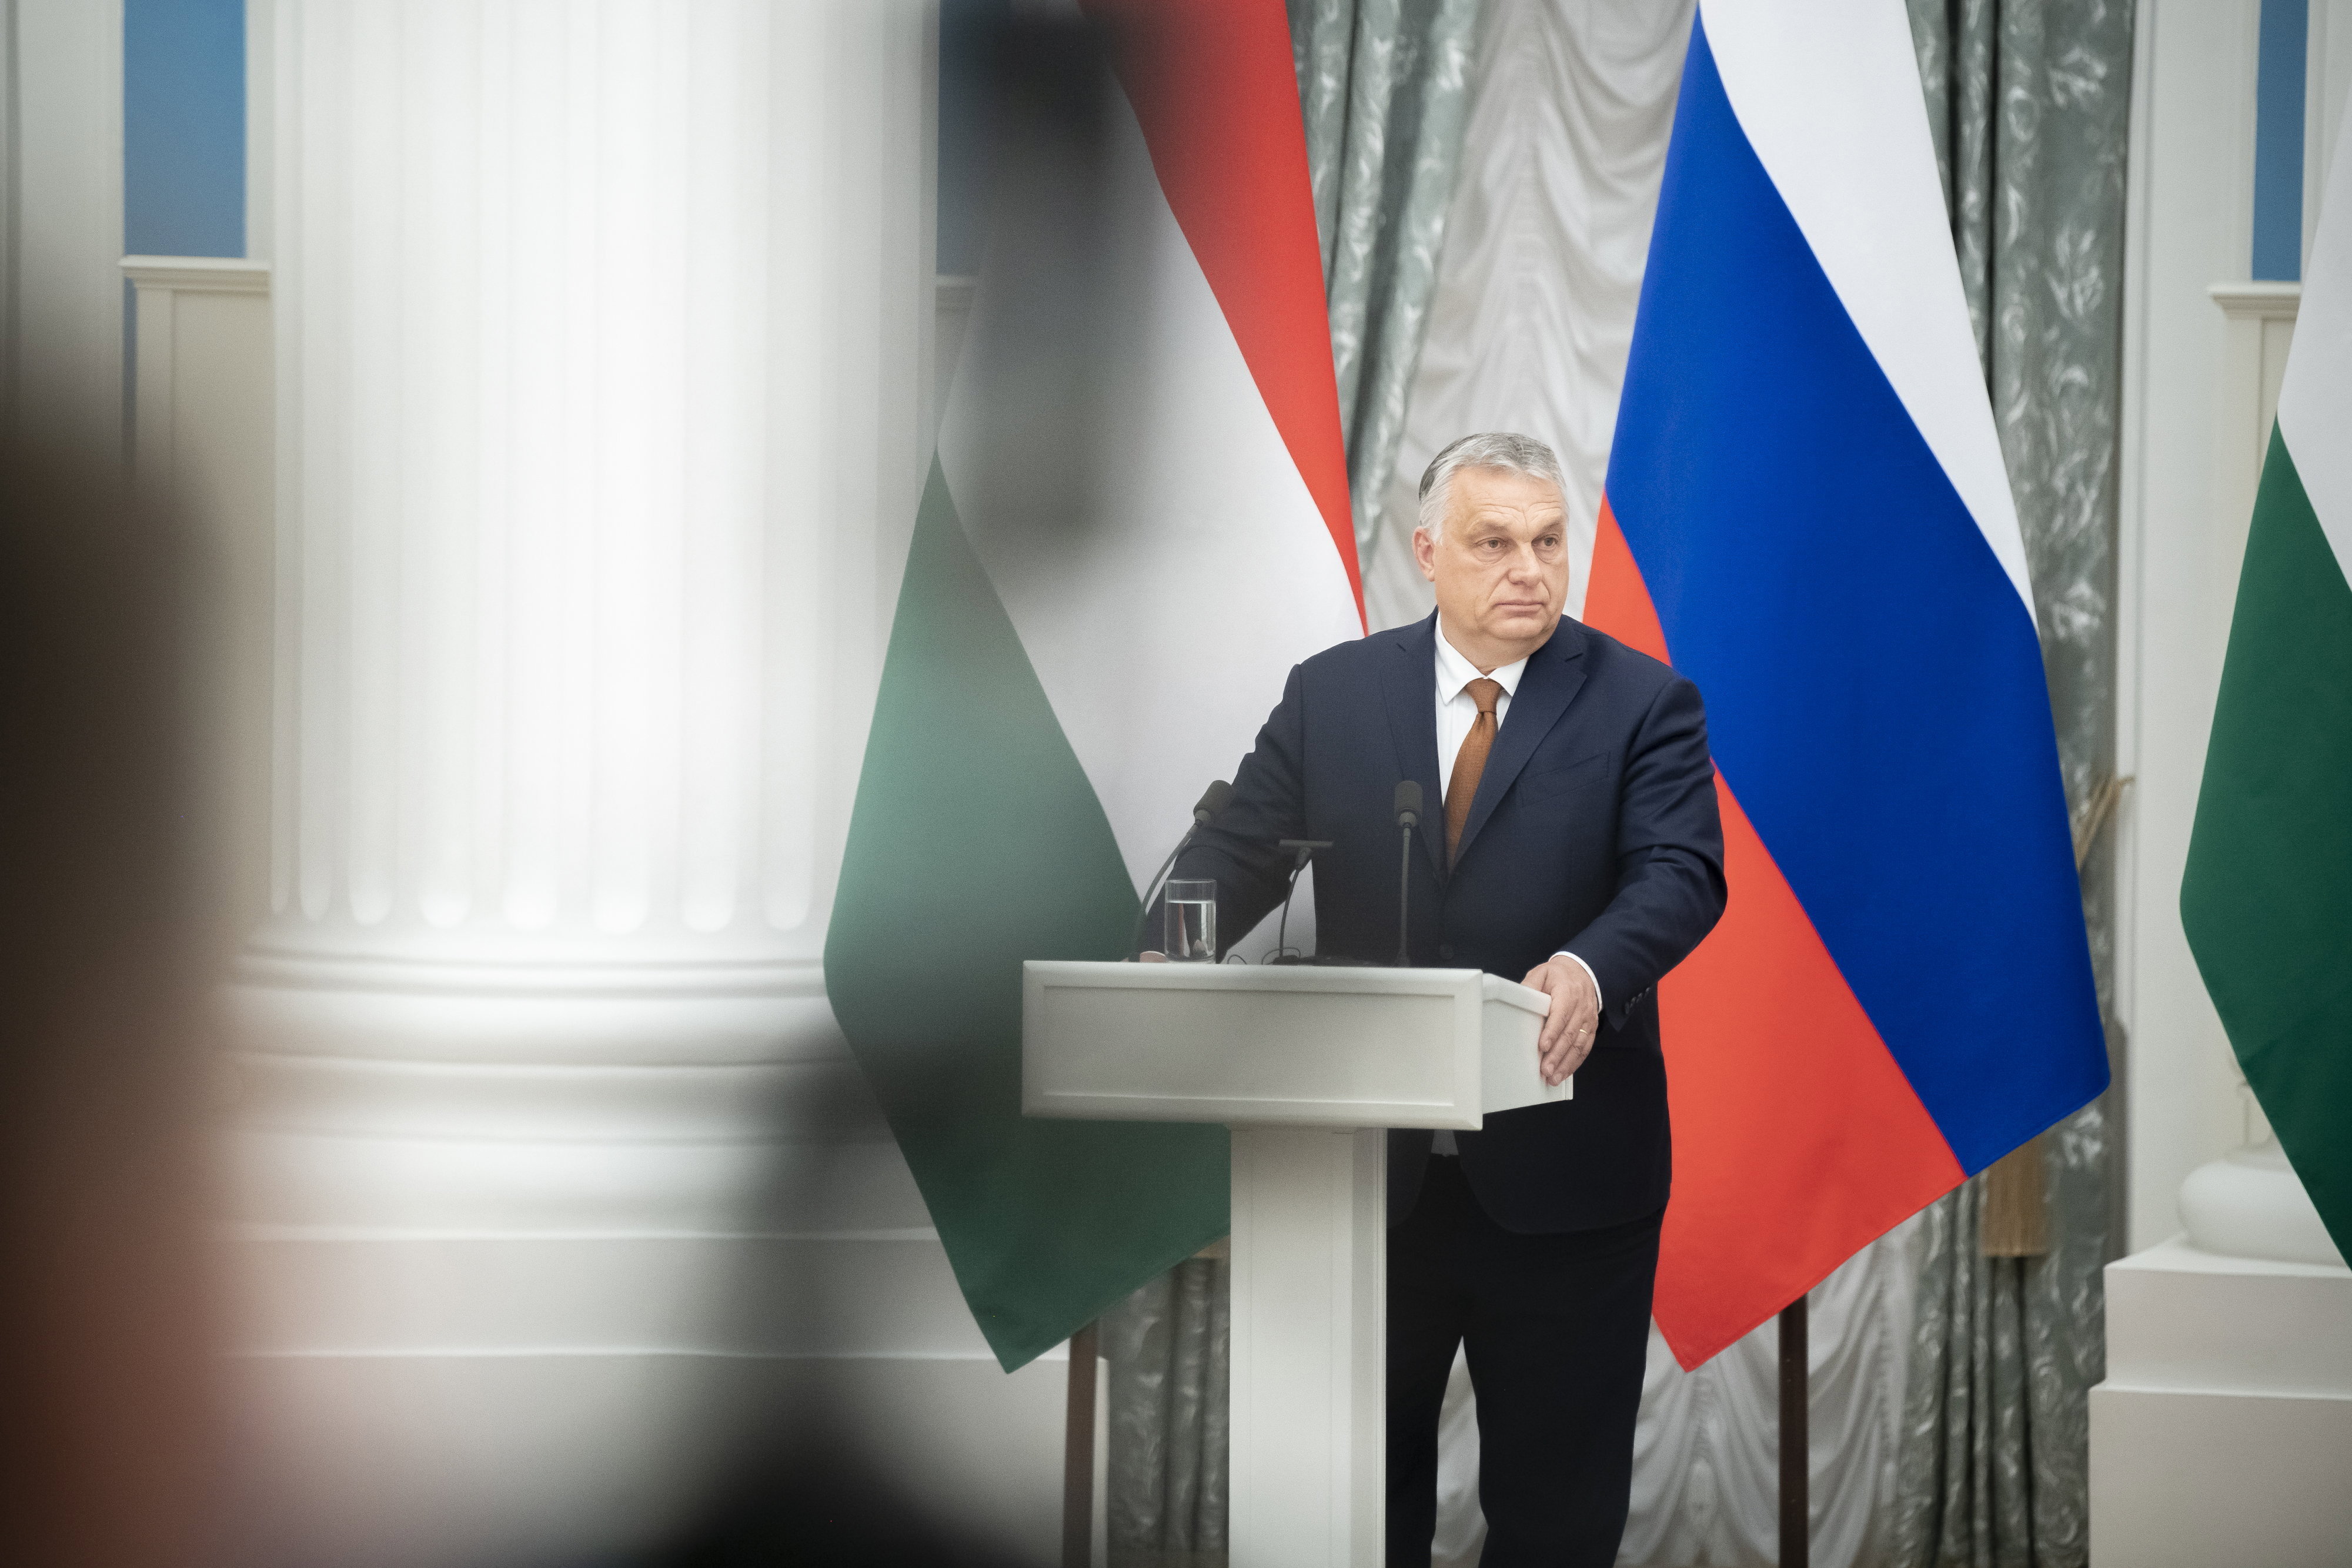 PM Orbán: With Russian Gas, Utility Bills Can Be Kept Low post's picture